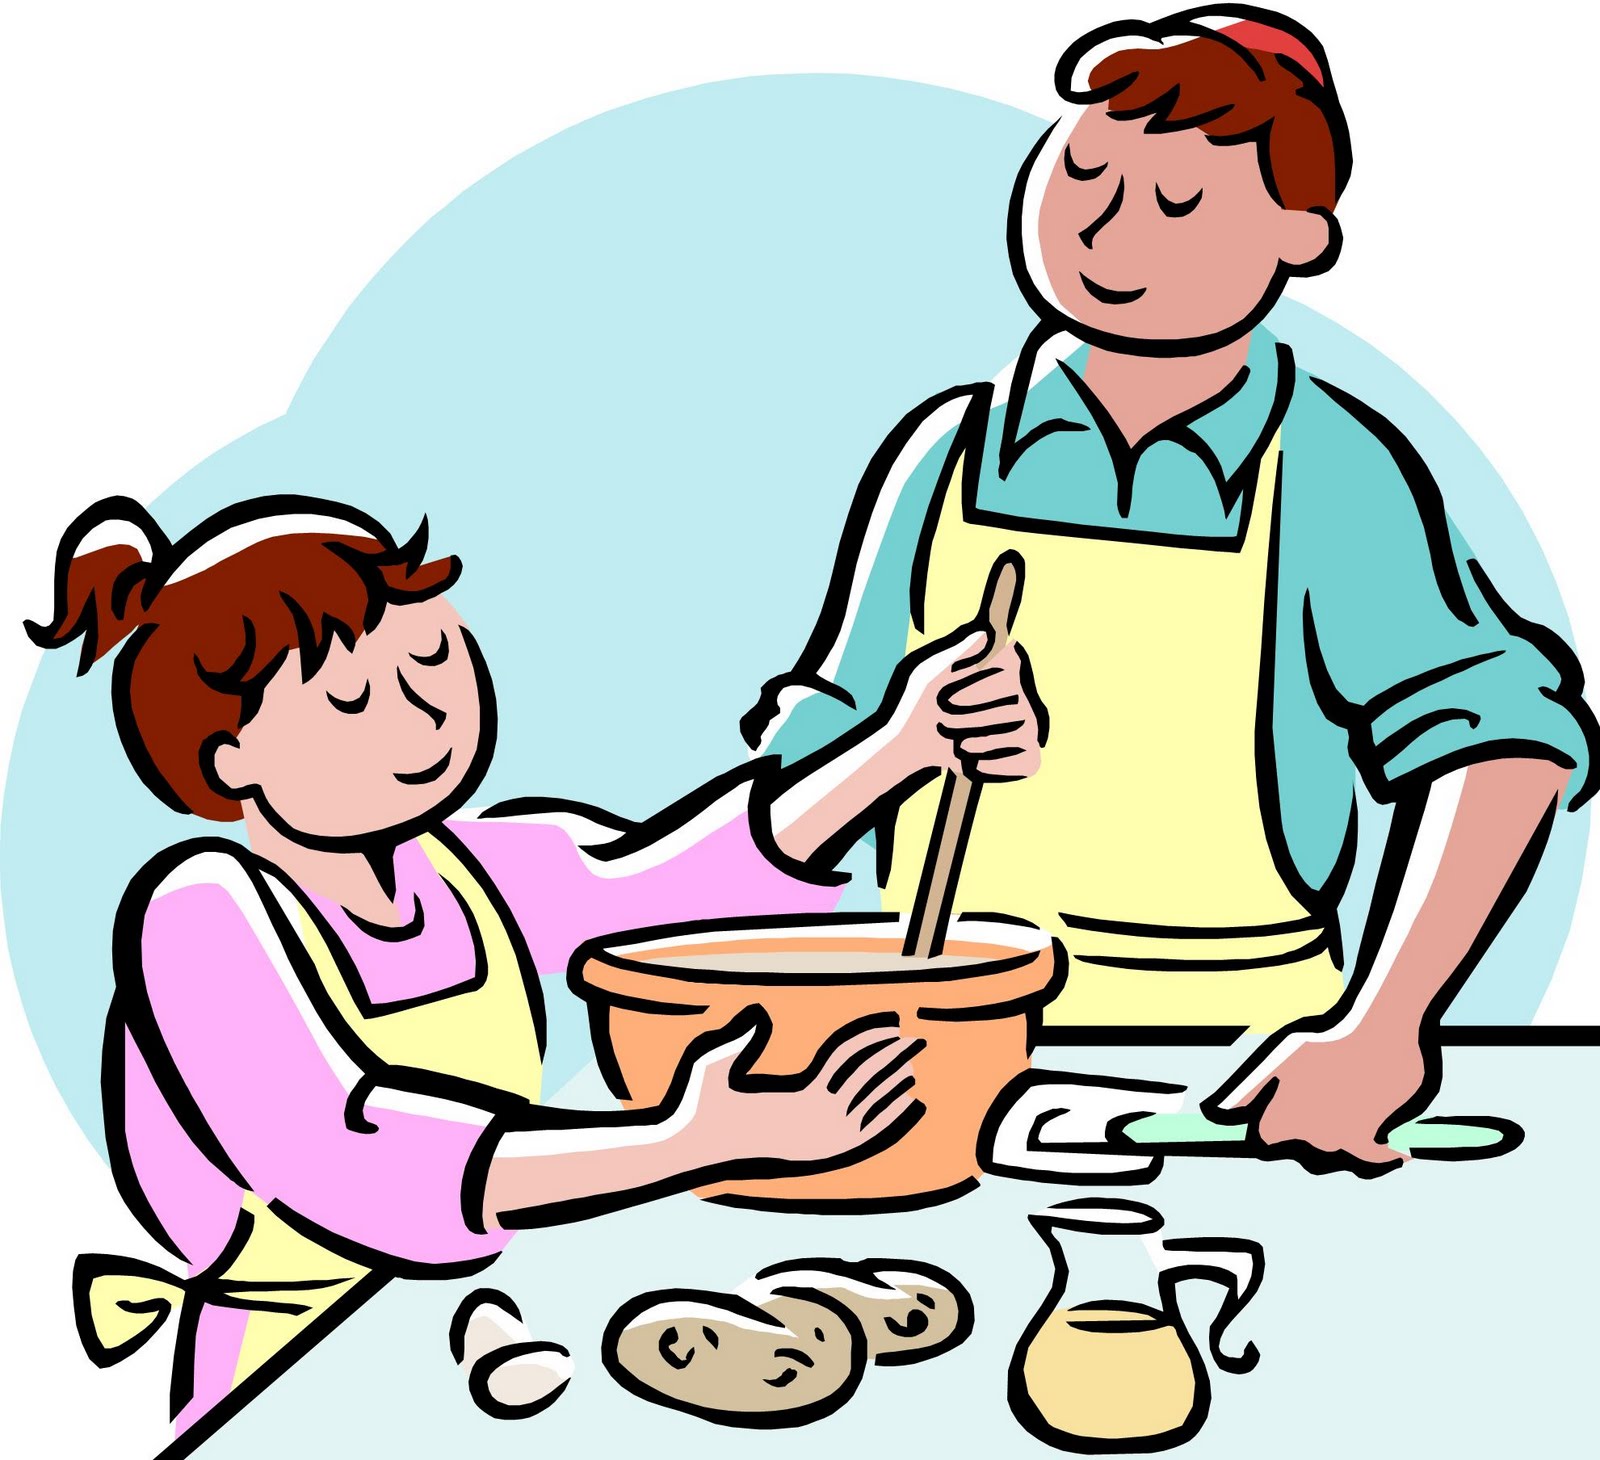 Kids Cooking Clipart Black And White | Clipart Panda - Free ...